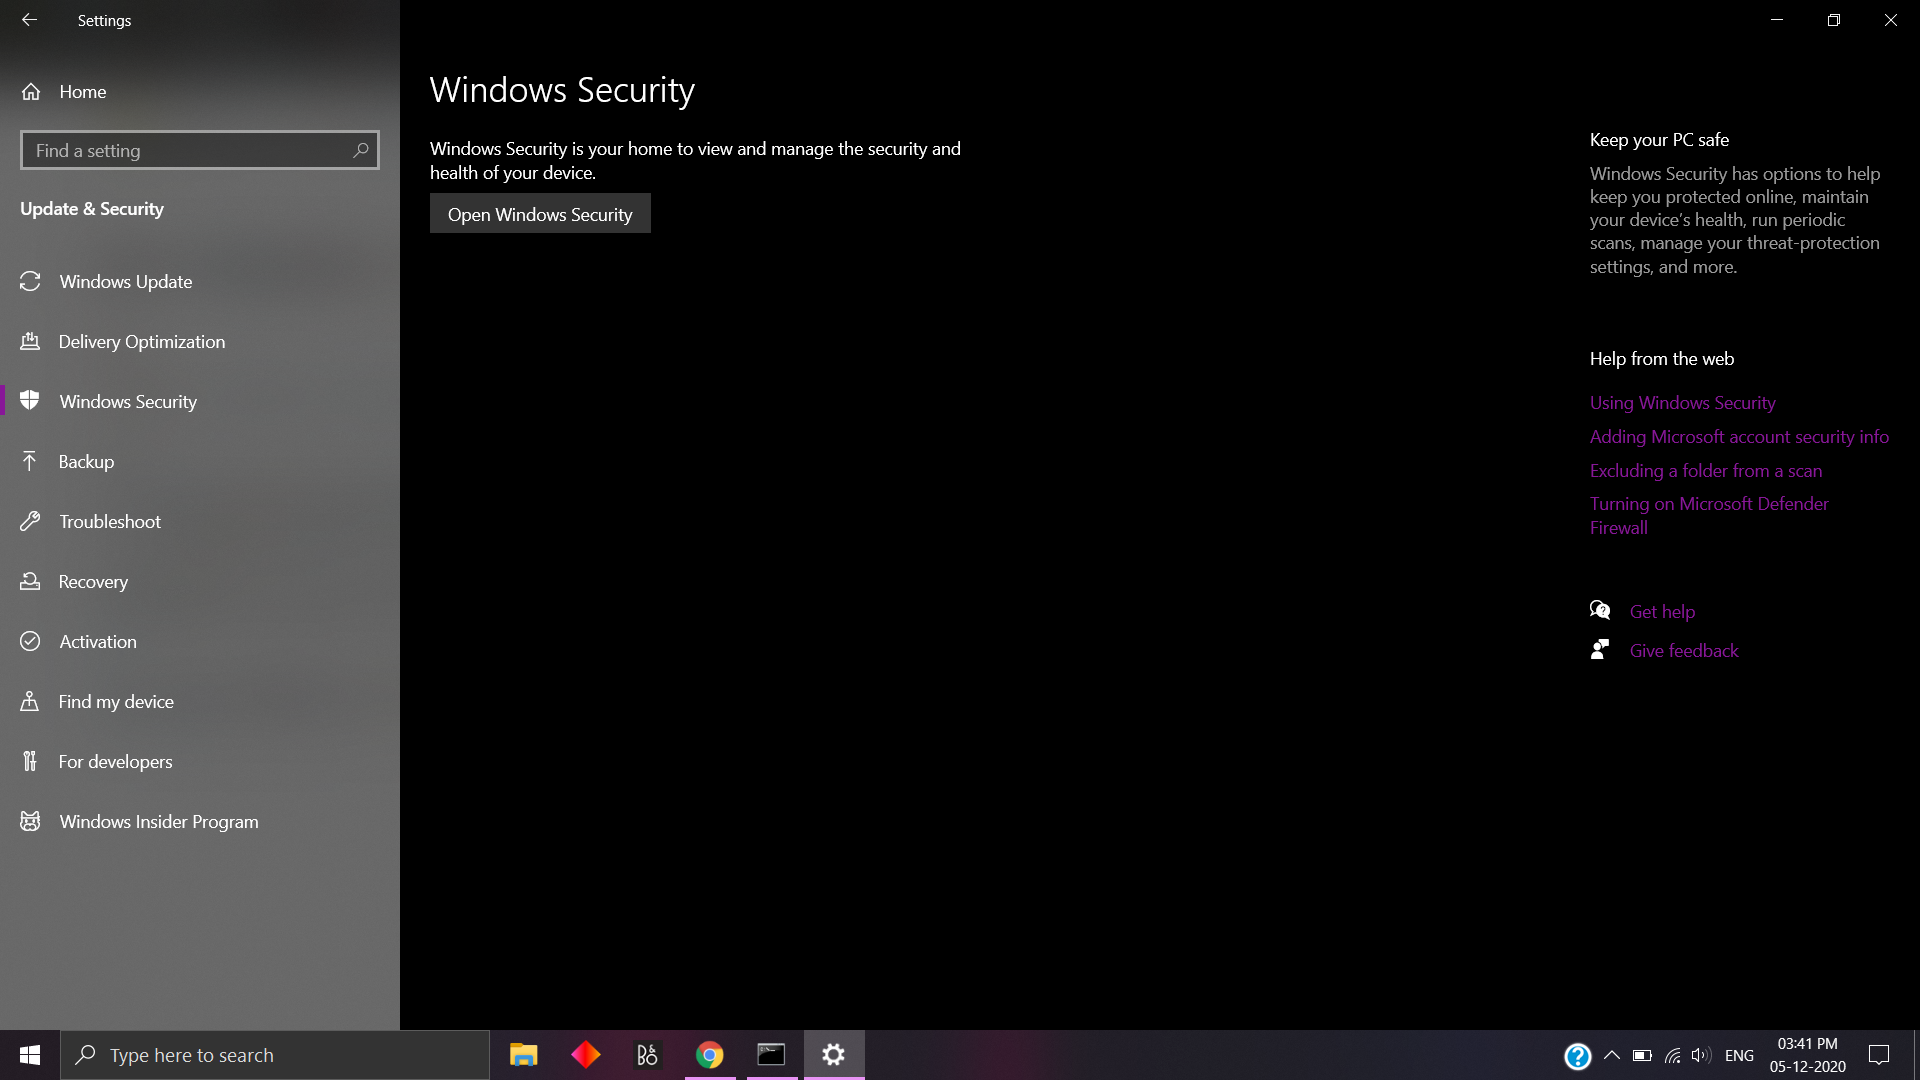 Windows Security page in settings blank. Cannot repair upgrade using Windows Media Creation... 1e73fa74-5d8c-4cf0-a92c-251872f9c7b3?upload=true.png